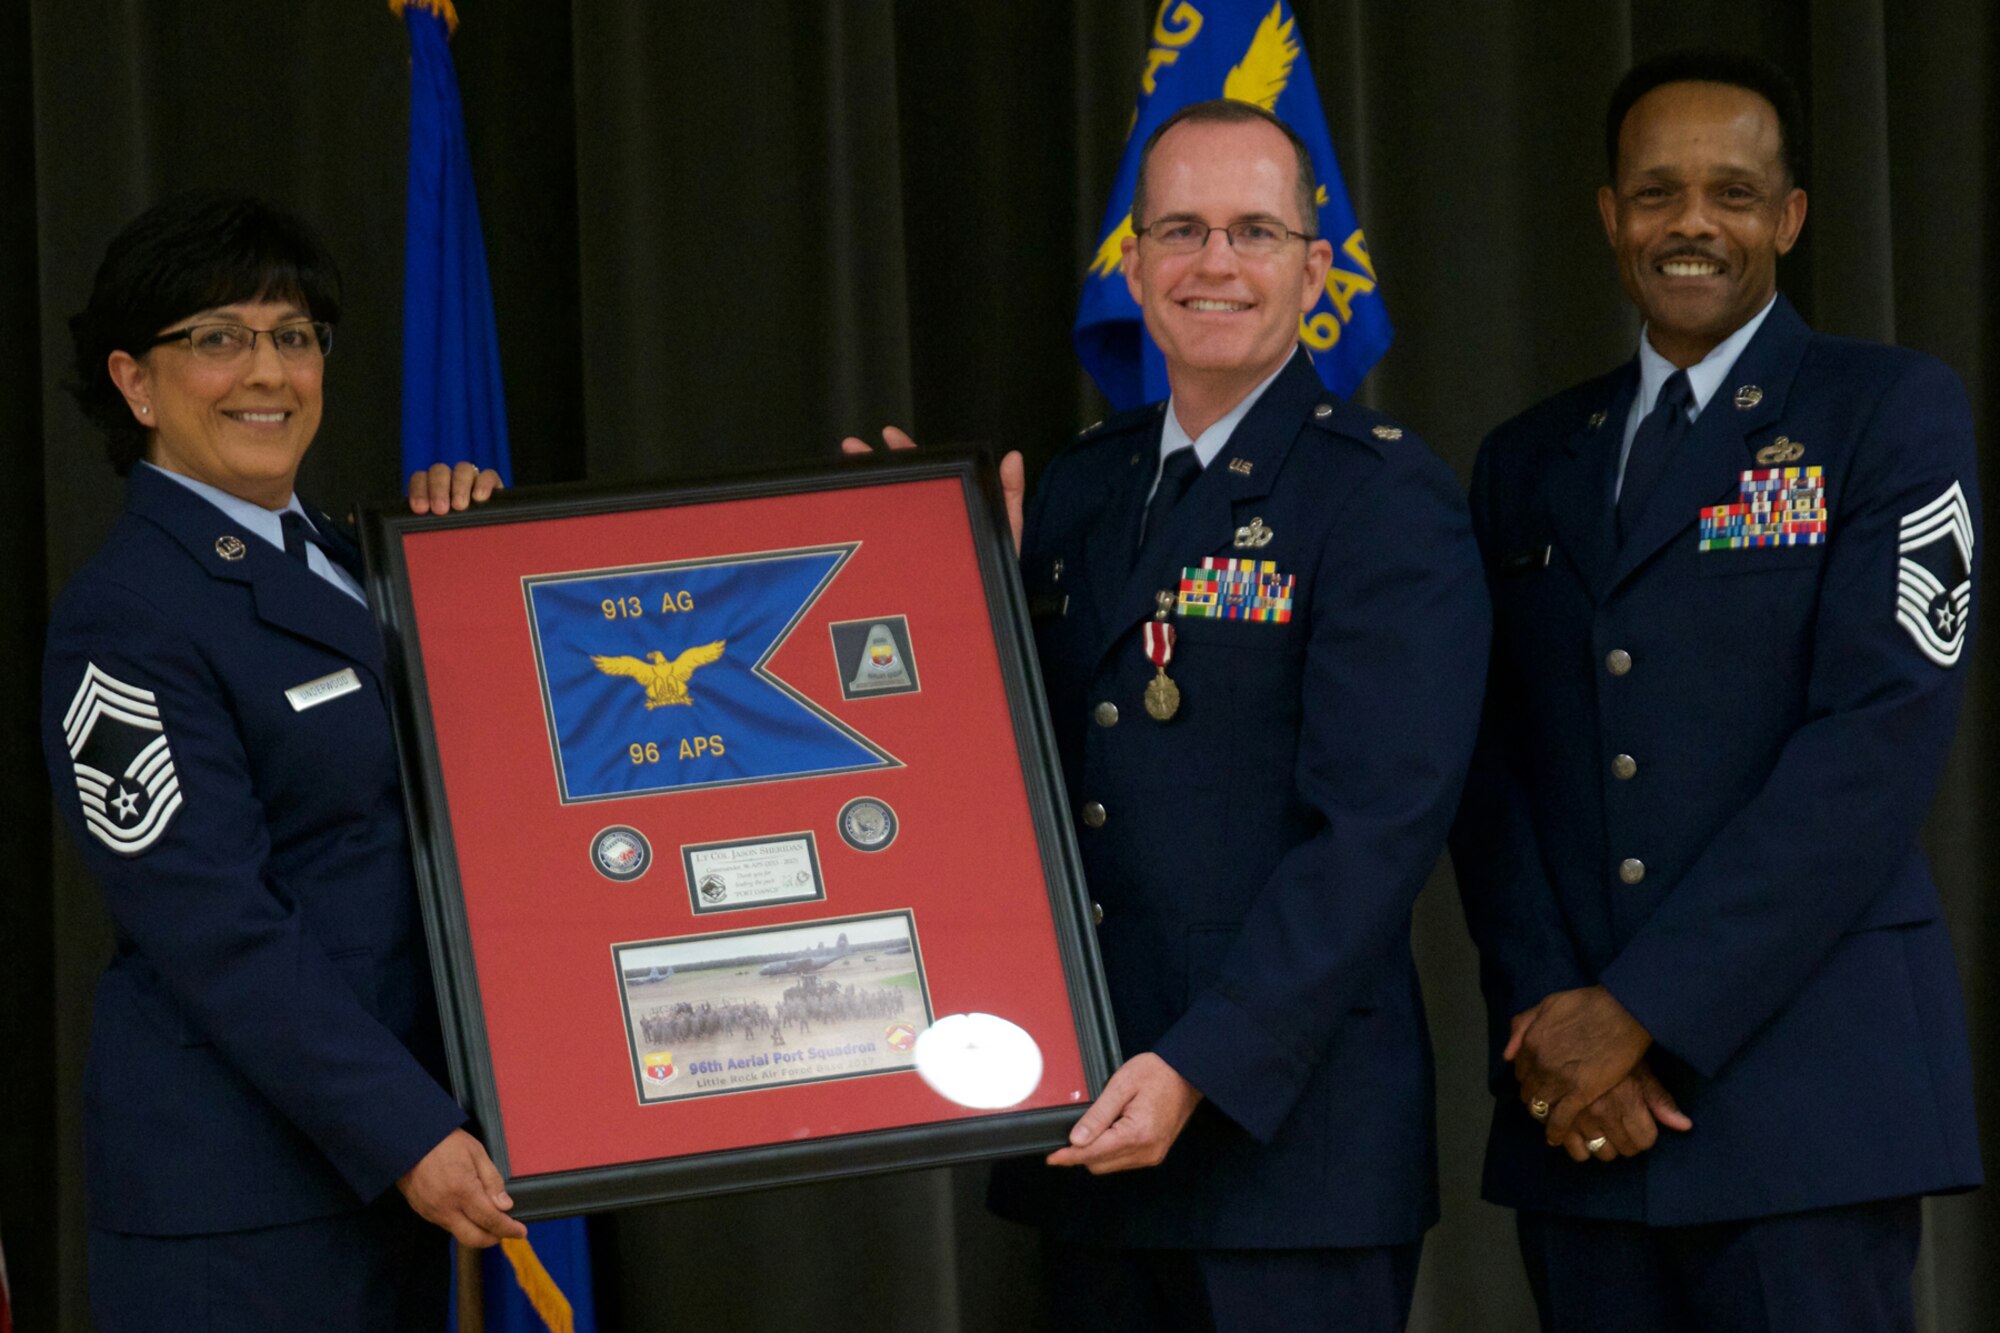 U.S. Air Force Reserve Chief Master Sgt. Cynthia Underwood, the air transportation superintendent for the 96th Aerial Port Squadron, Lt. Col. Jason Sheridan, and Chief Master Sgt. Alvin Glover, operations superintendent, 96 APS, pose for a photo during Sheridan’s retirement ceremony at Little Rock Air Force Base, Ark., July 8, 2017. Sheridan, a former 96 APS commander, retired after 22 years of service. (U.S. Air Force photo by Capt. Casey Staheli/Released)